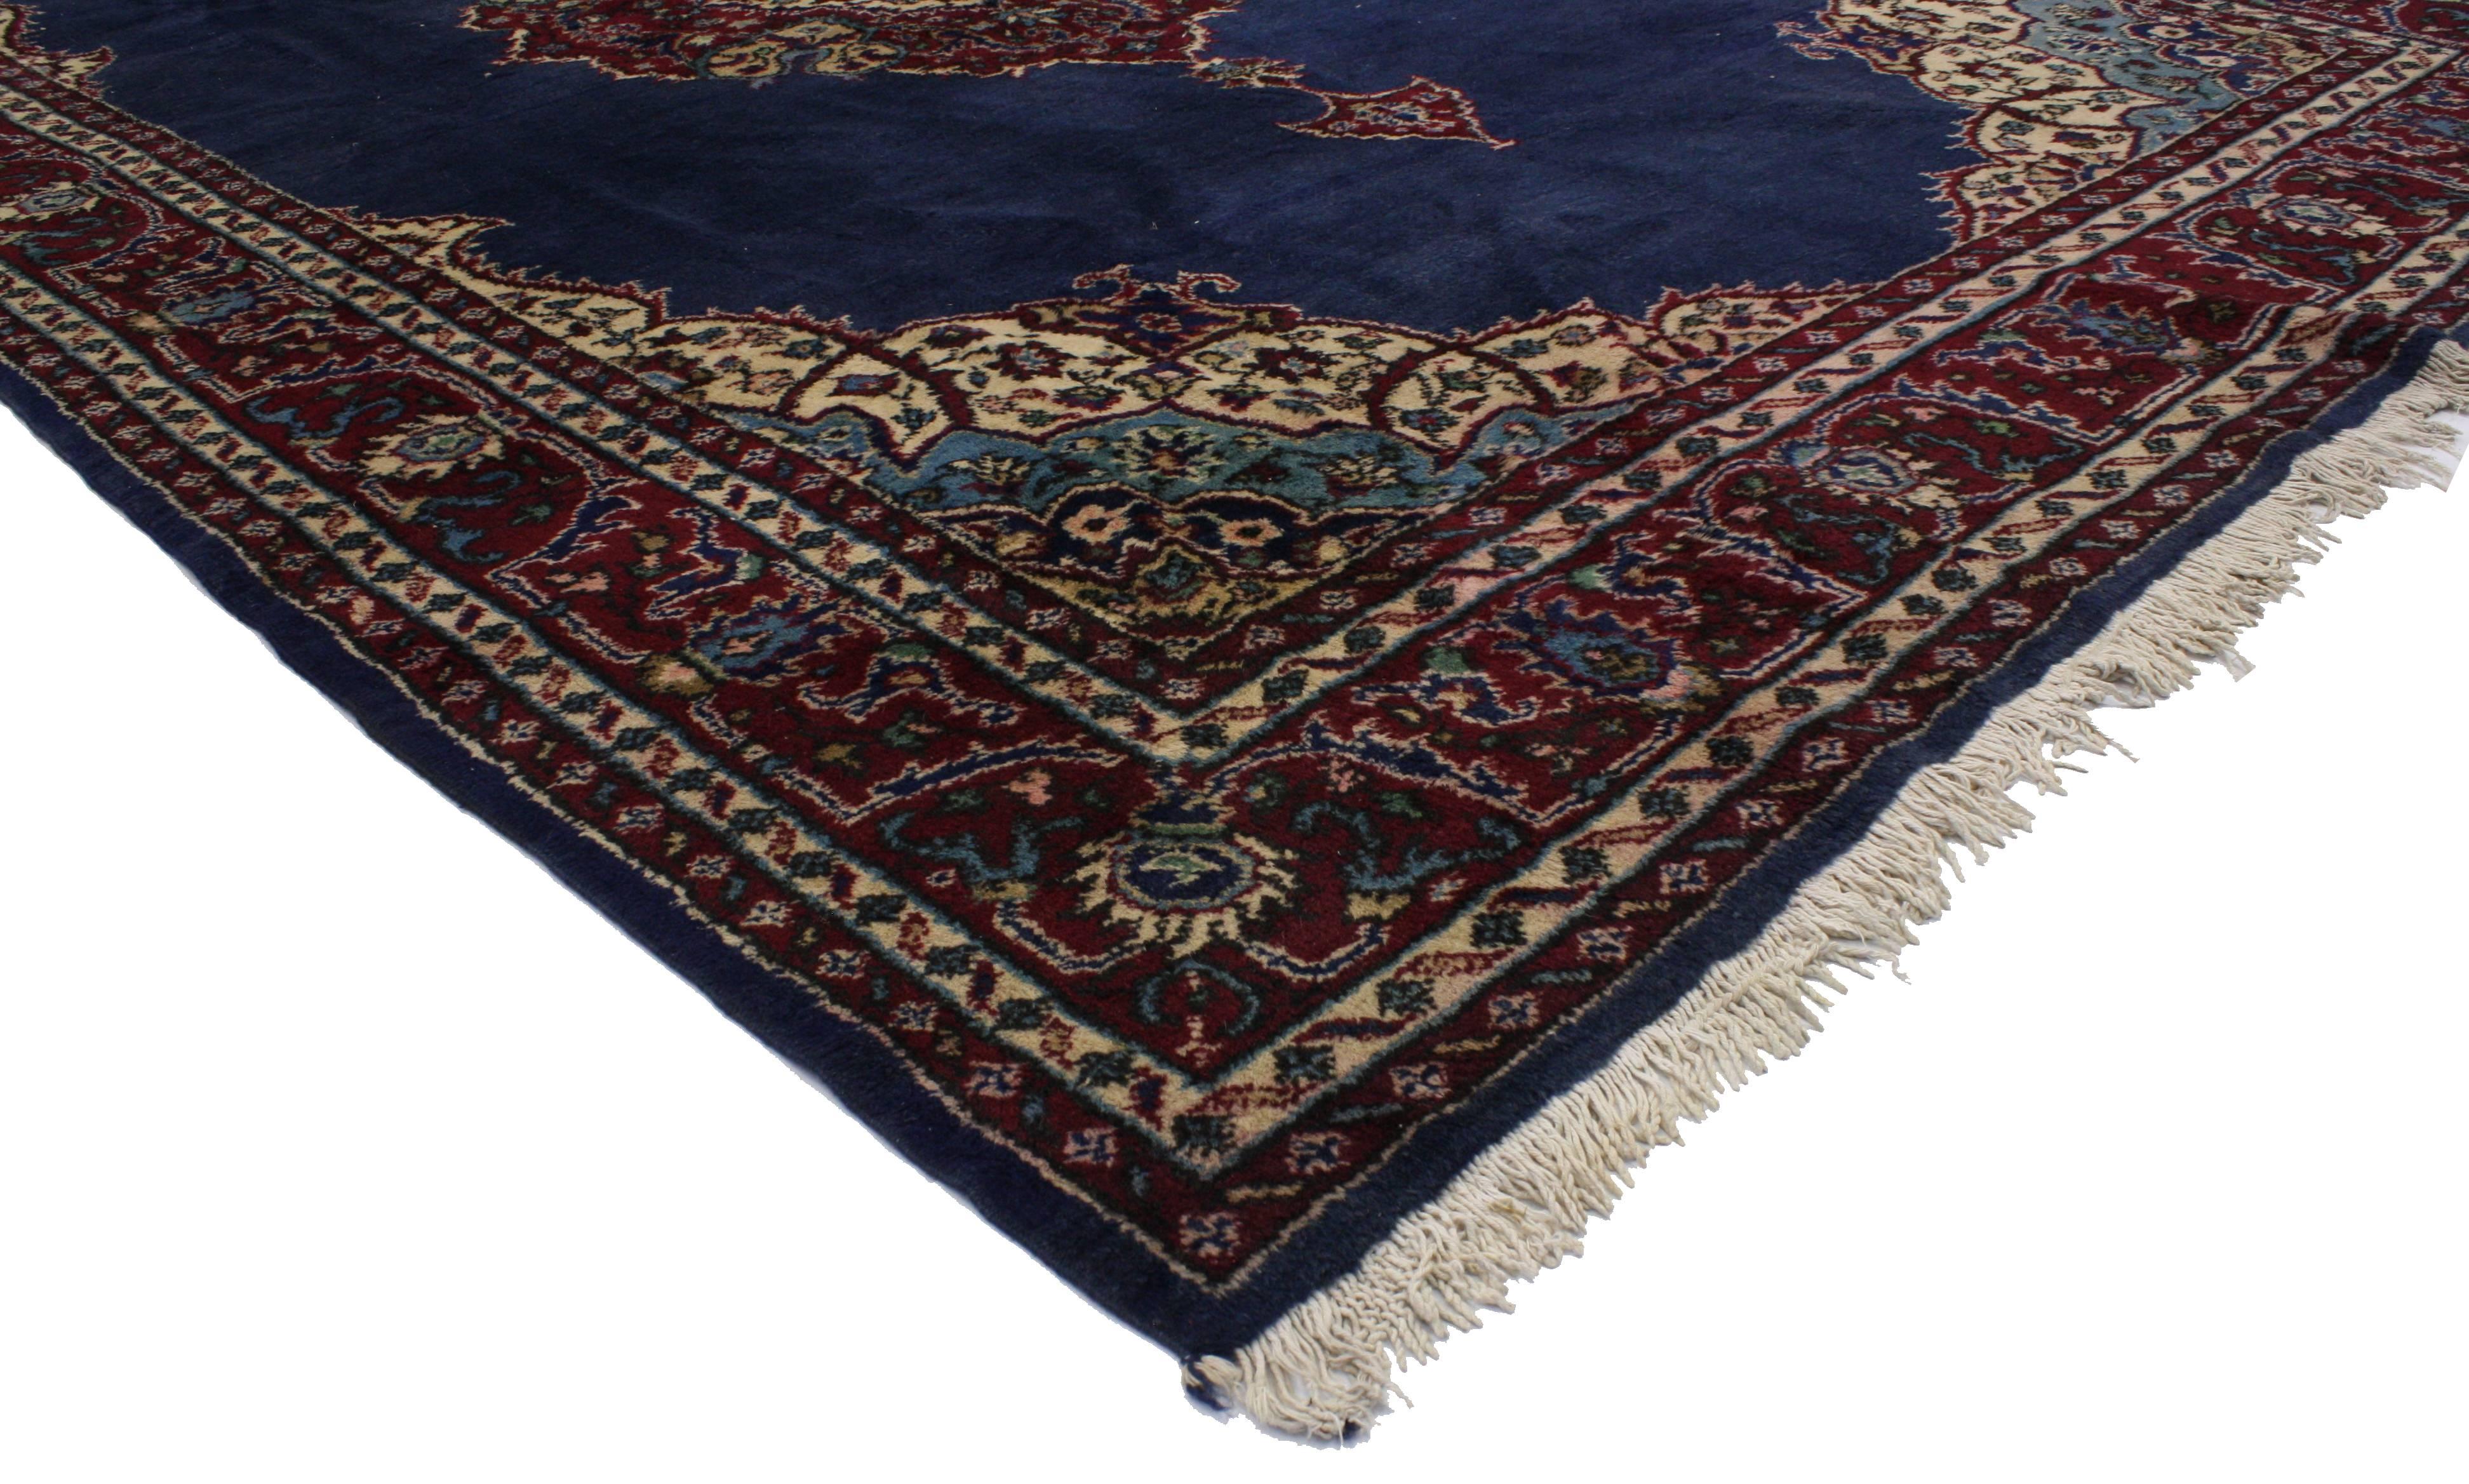 Hand-knotted wool antique Turkish Sparta rug with traditional modern style featuring an embellished center medallion in an open navy blue field surrounded by a geometric border and arabesque quarter panels. The color palette consists of navy blue,